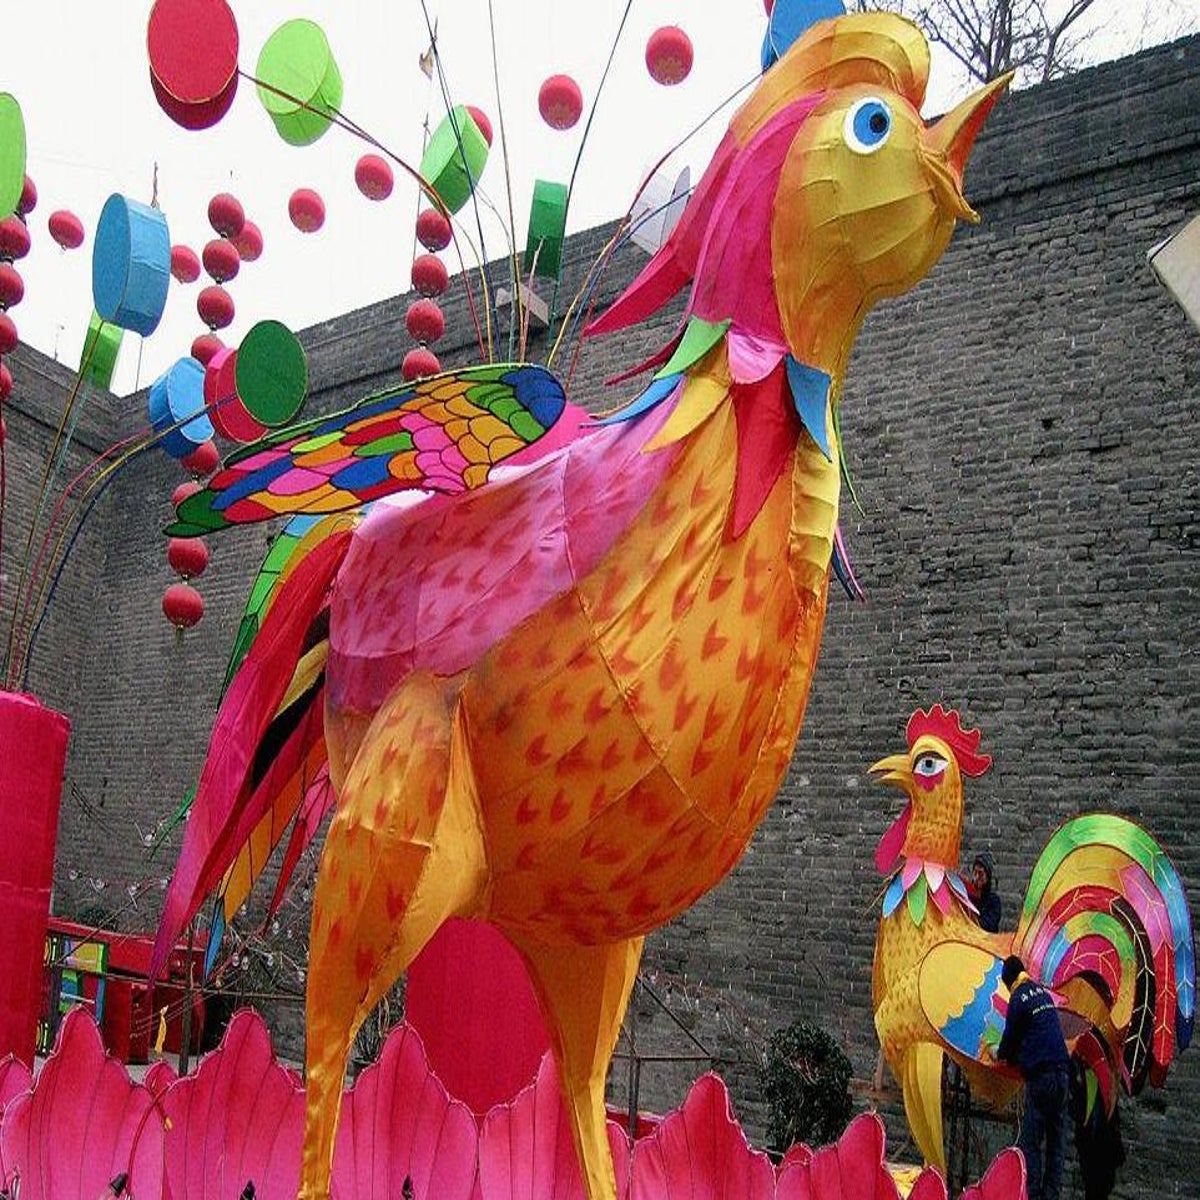 Year of the Rooster Luxury Items: Hit or Miss with Chinese Consumers?